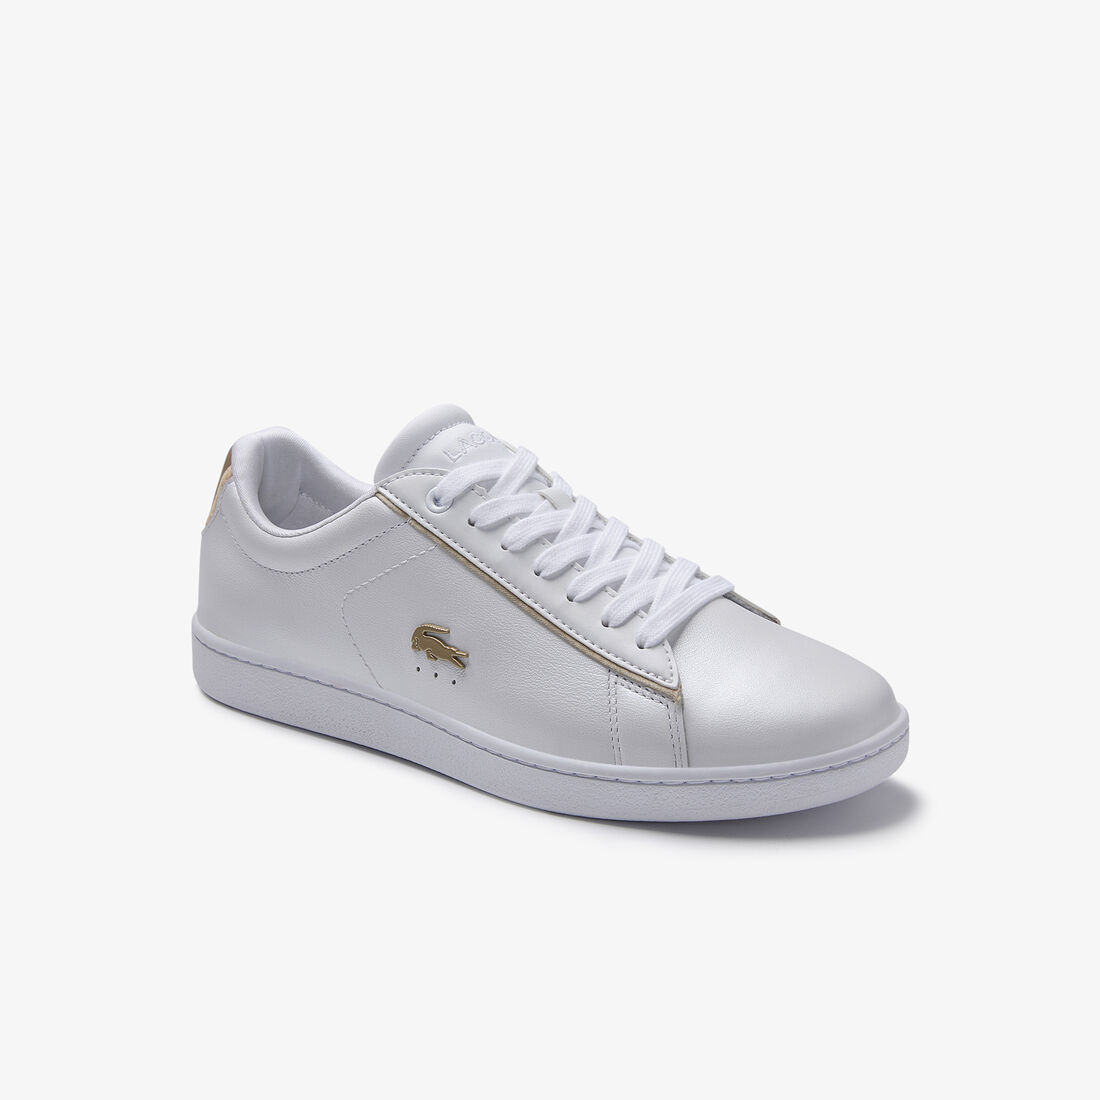 Women's Carnaby Evo Satin and Leather Trainers